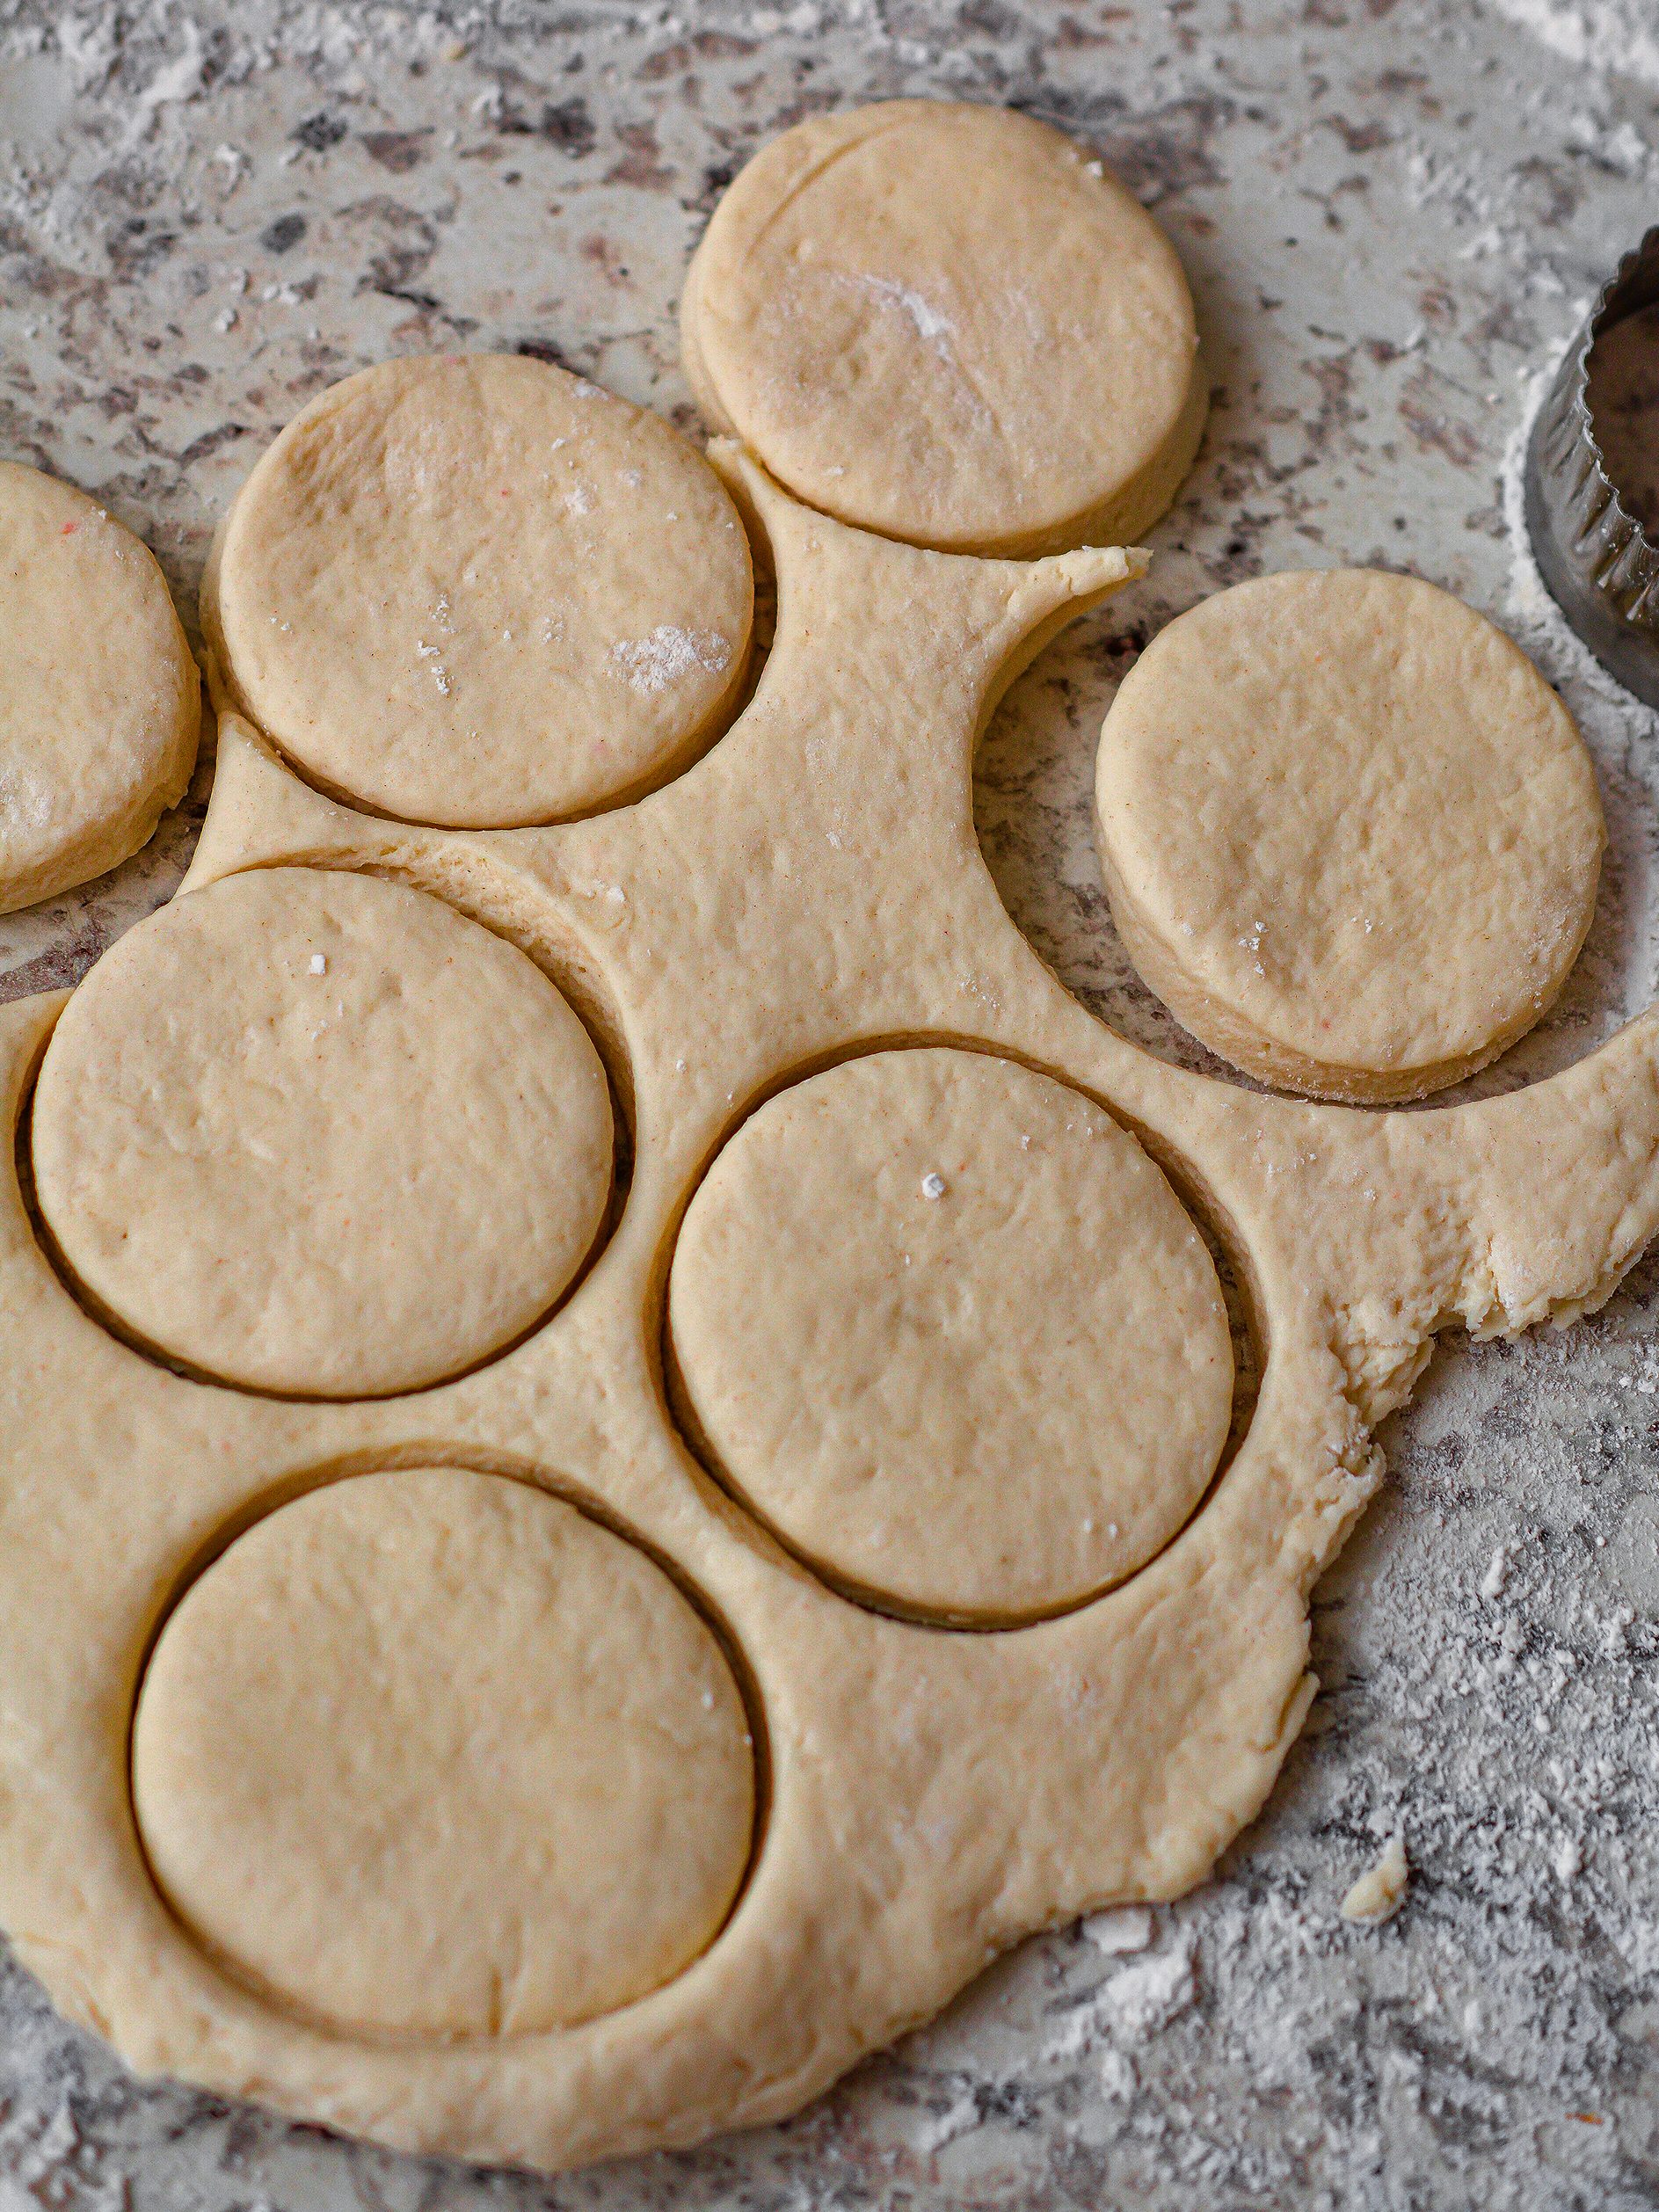 Use a 2 inch cookie cutter to cut circles out of the dough.